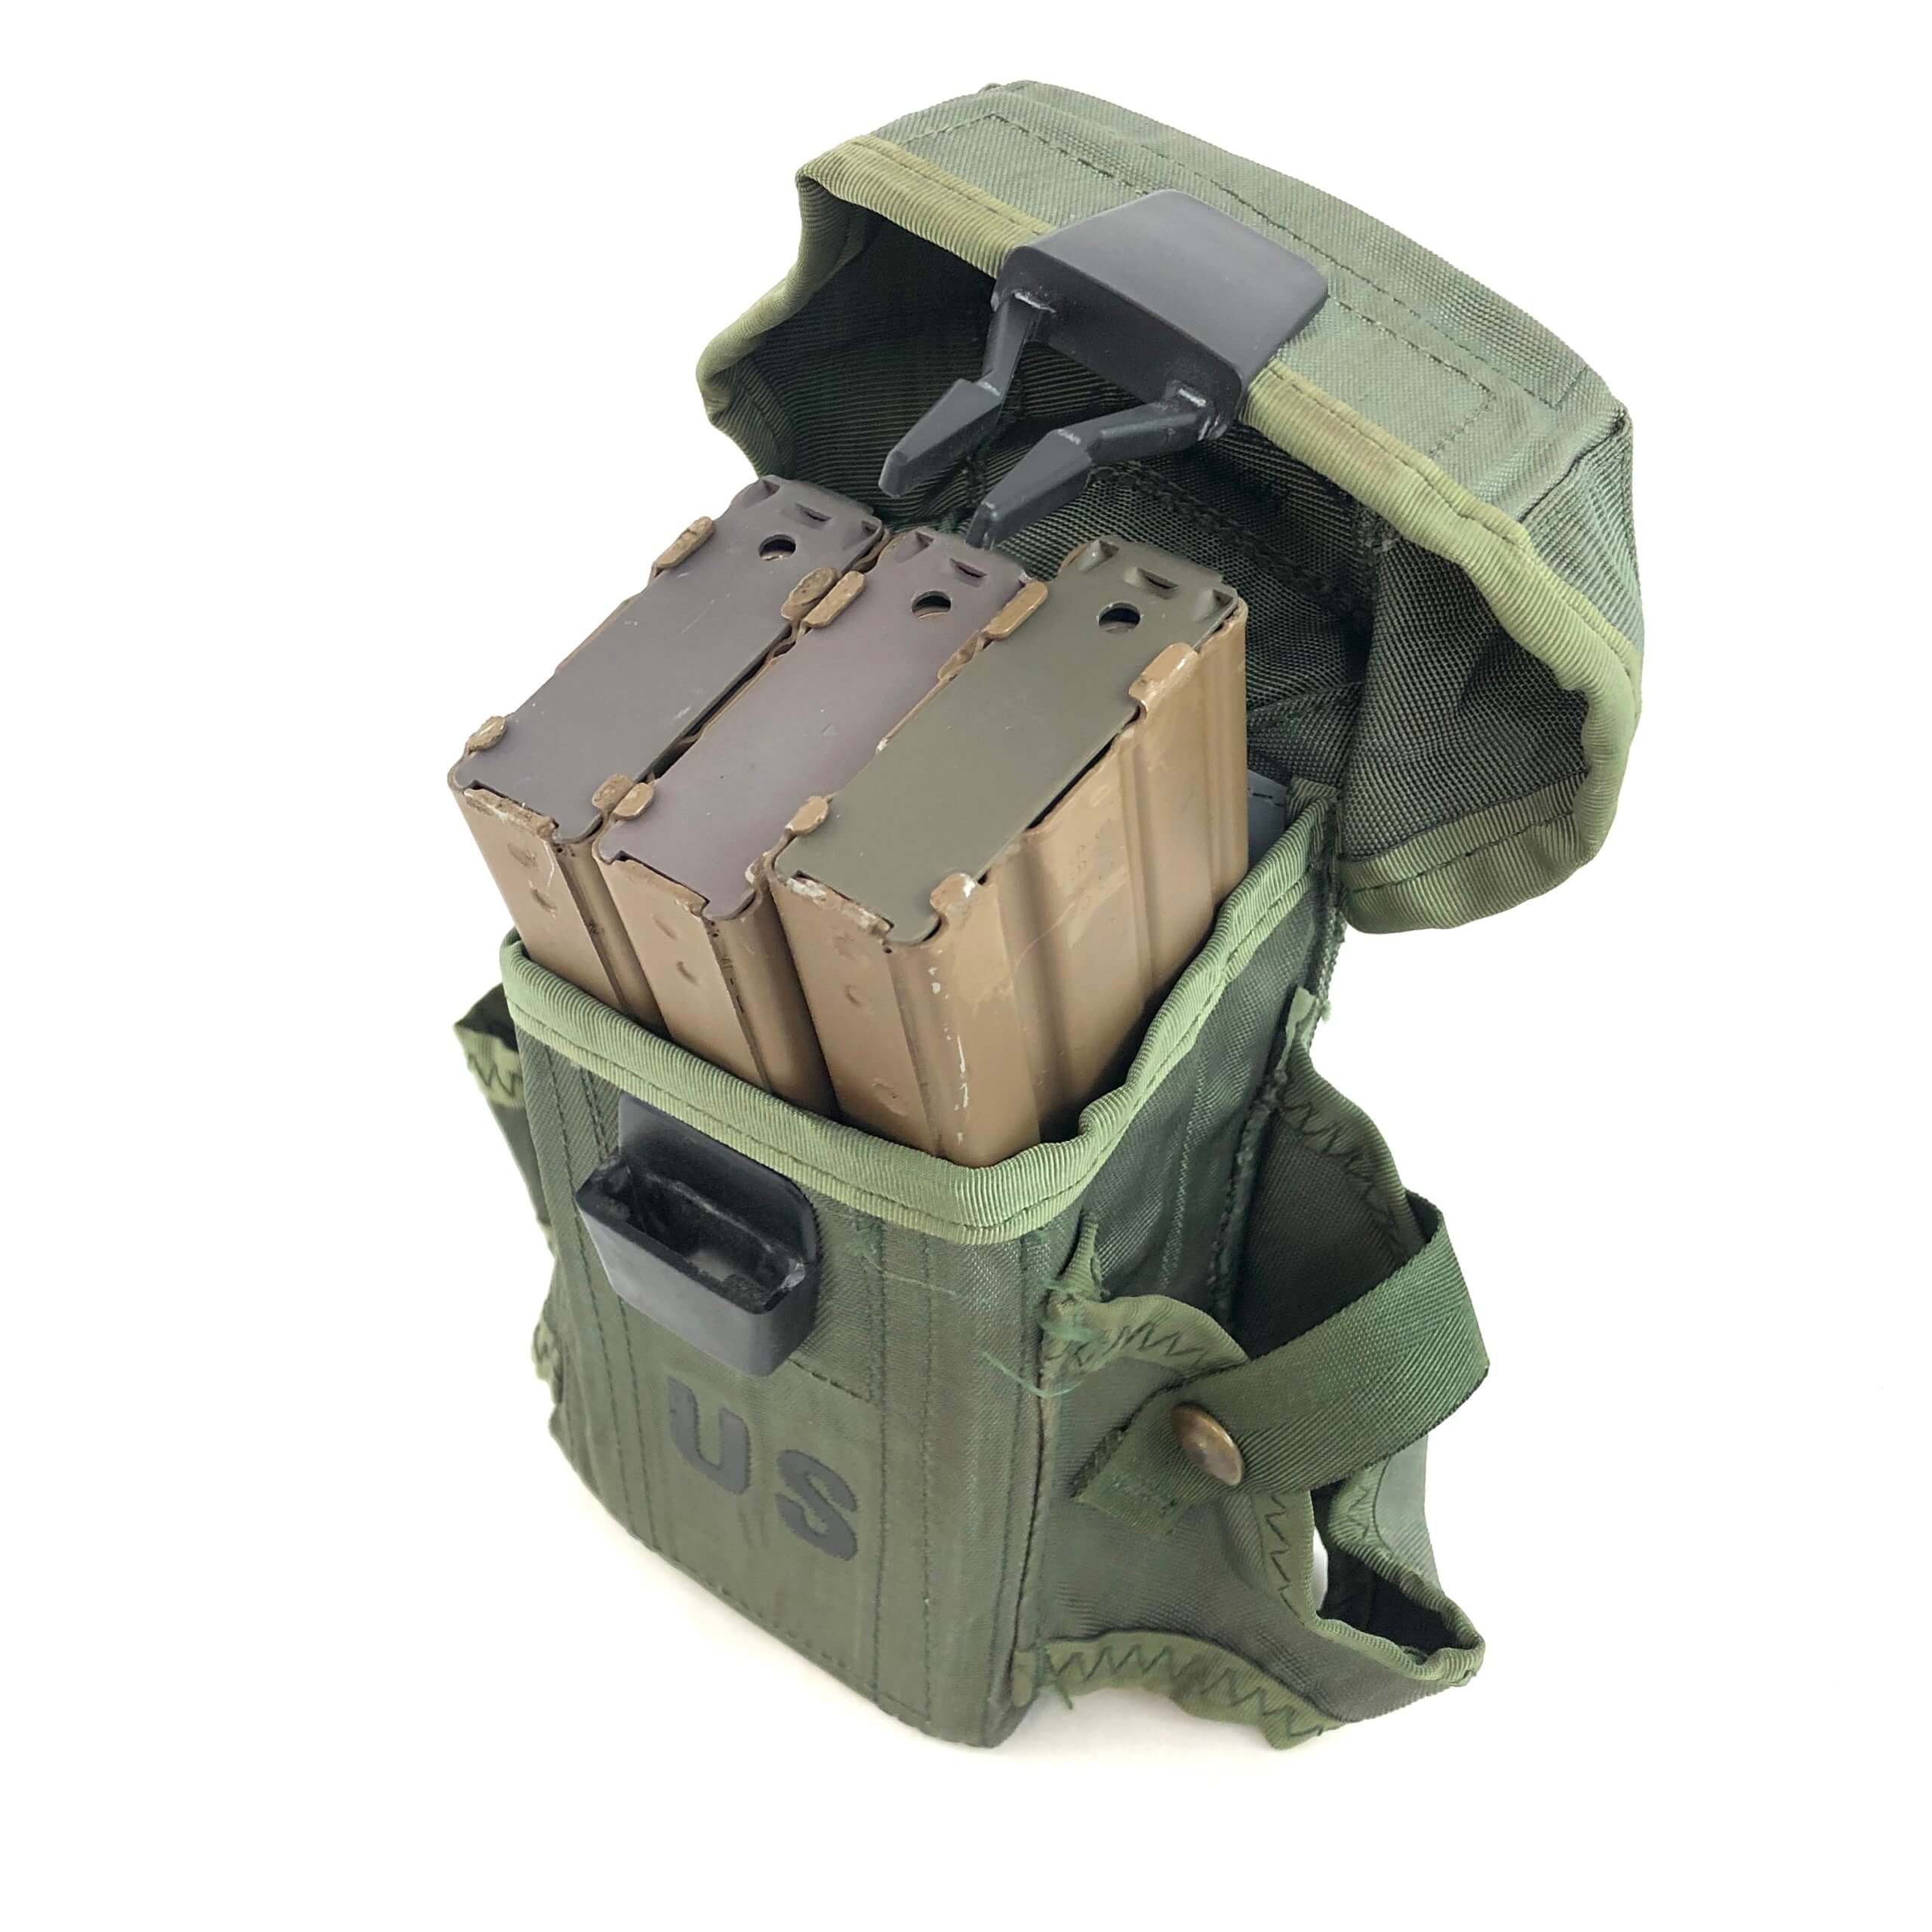 Lot 2 US Military Army 9MM Mag Magazine Ammo Pouch w/ Alice Clips OD Green VGC 